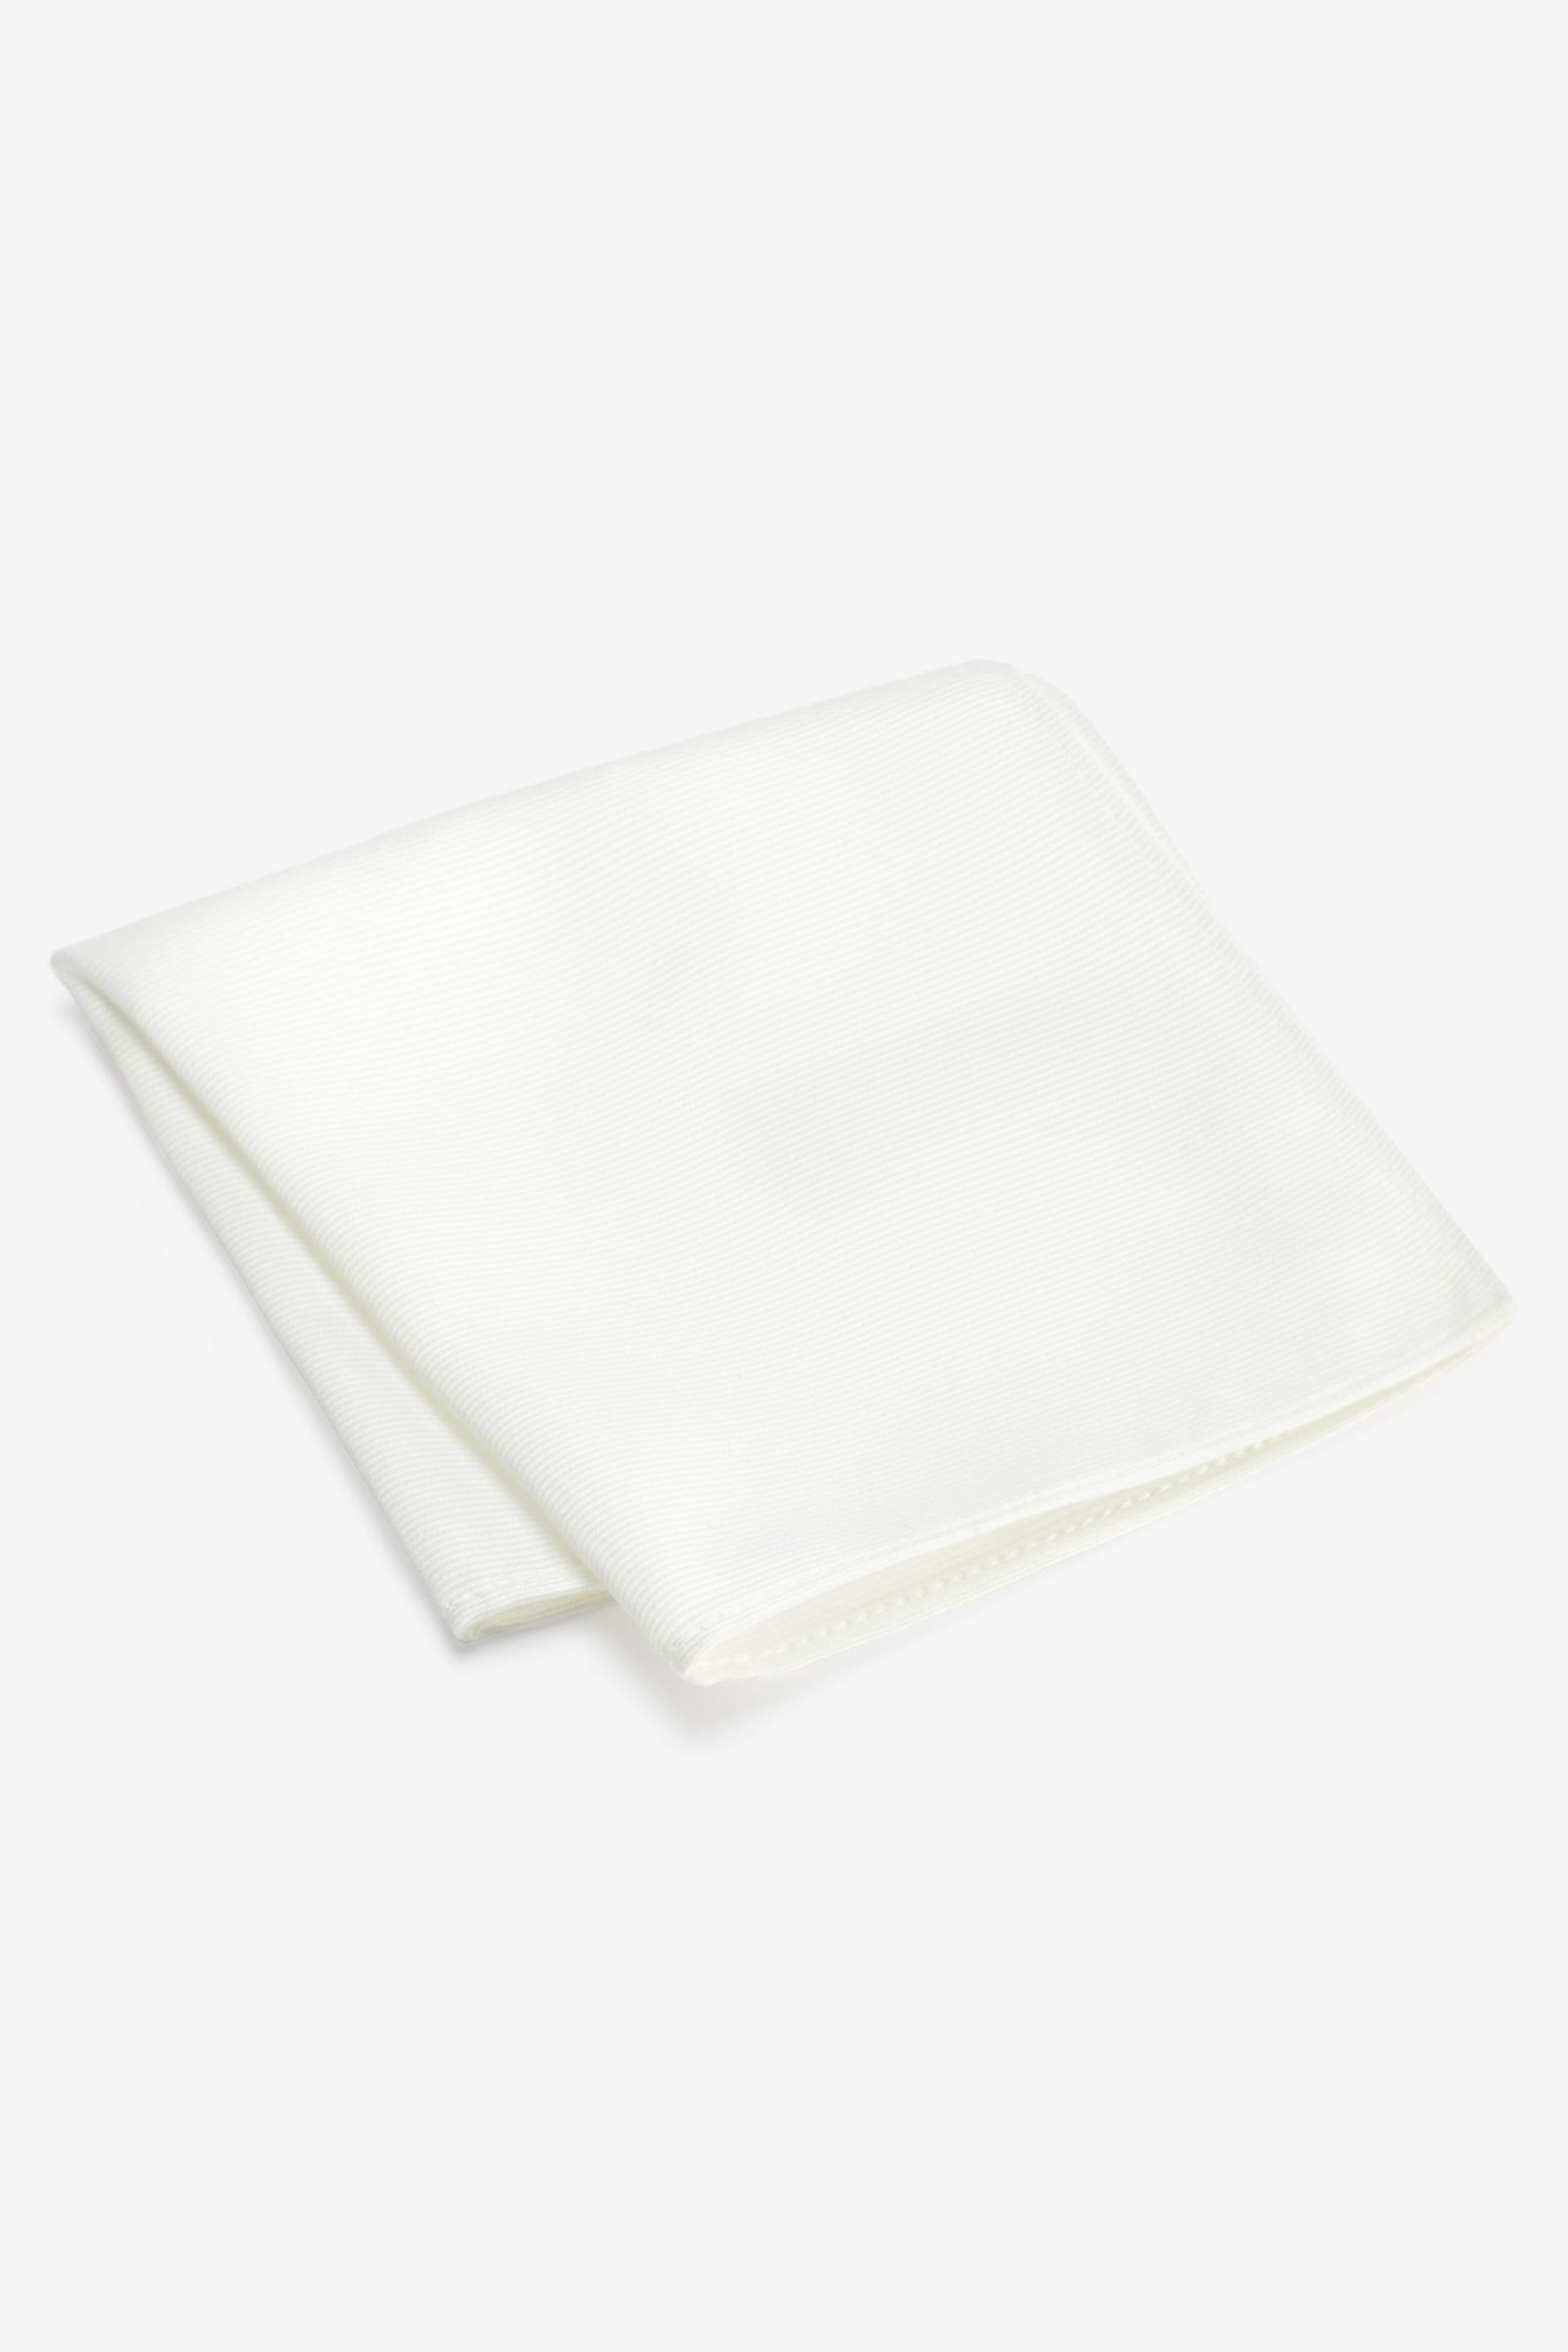 White Ivory Recycled Polyester Twill Pocket Square - Image 2 of 2